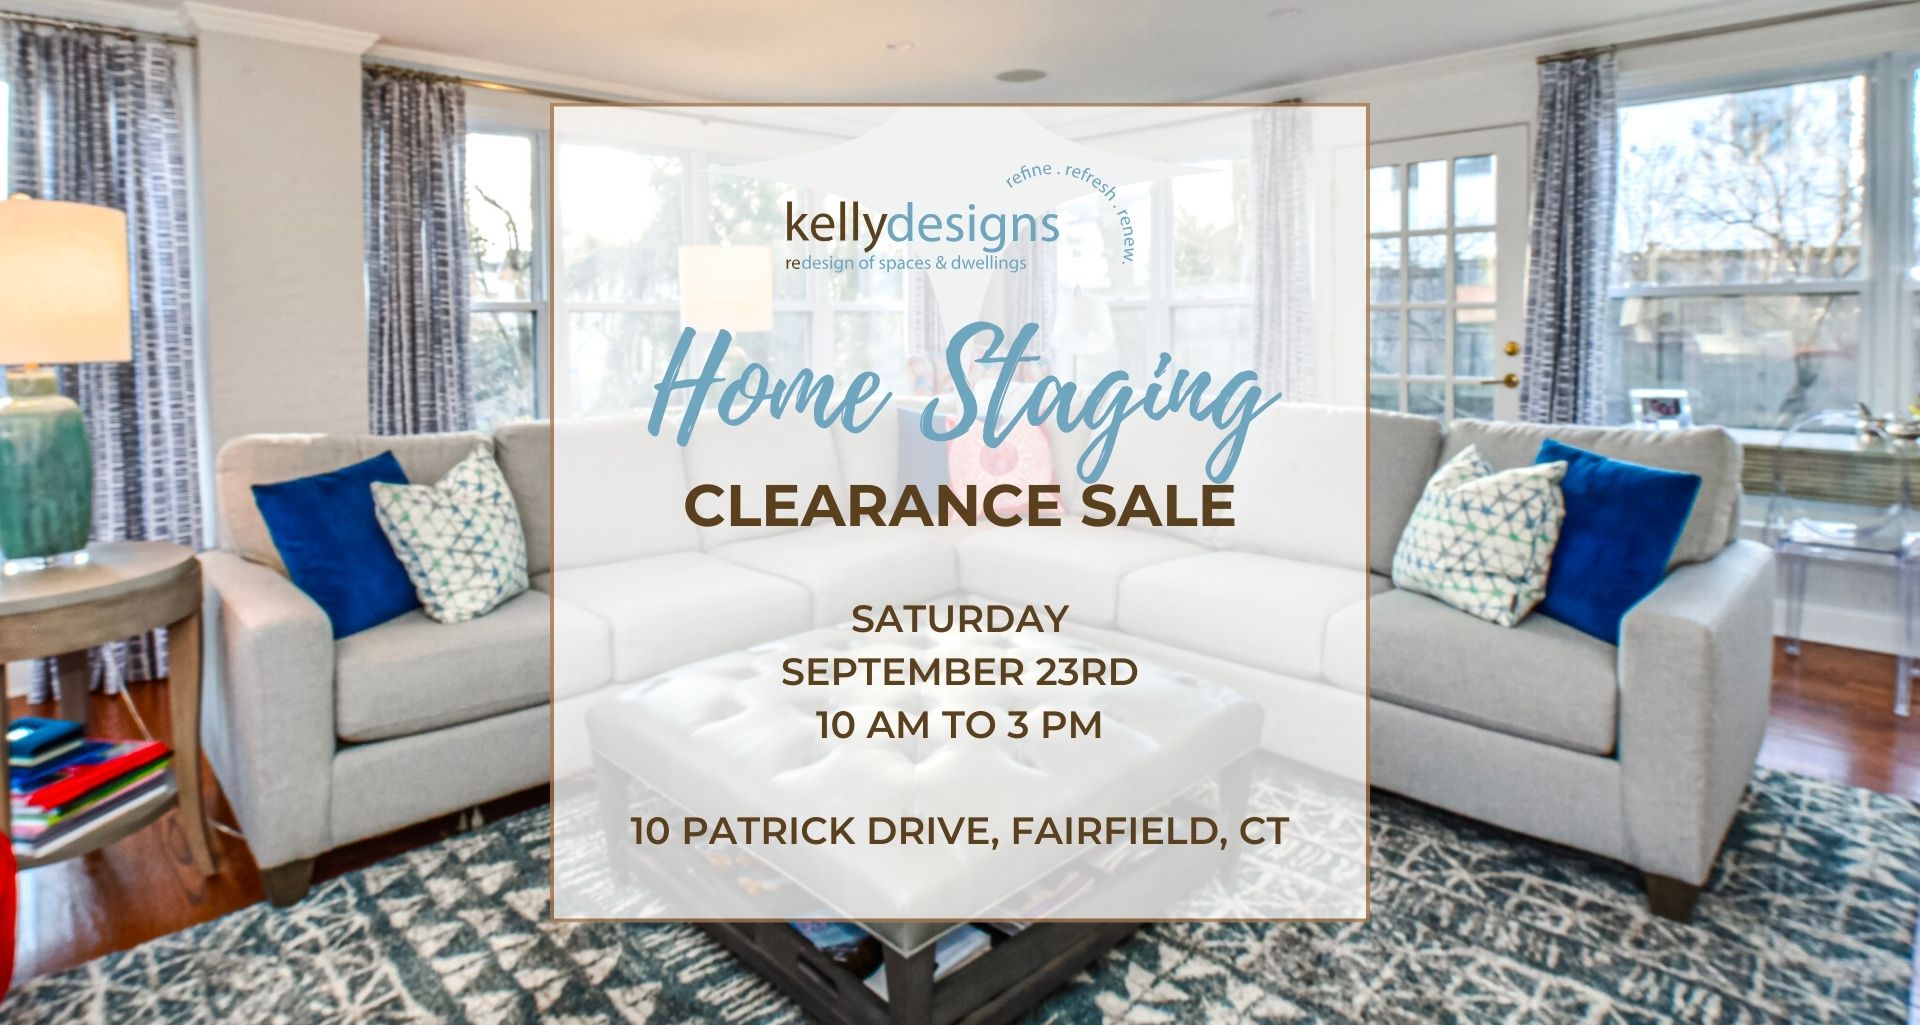 Home Staging Clearance Sale